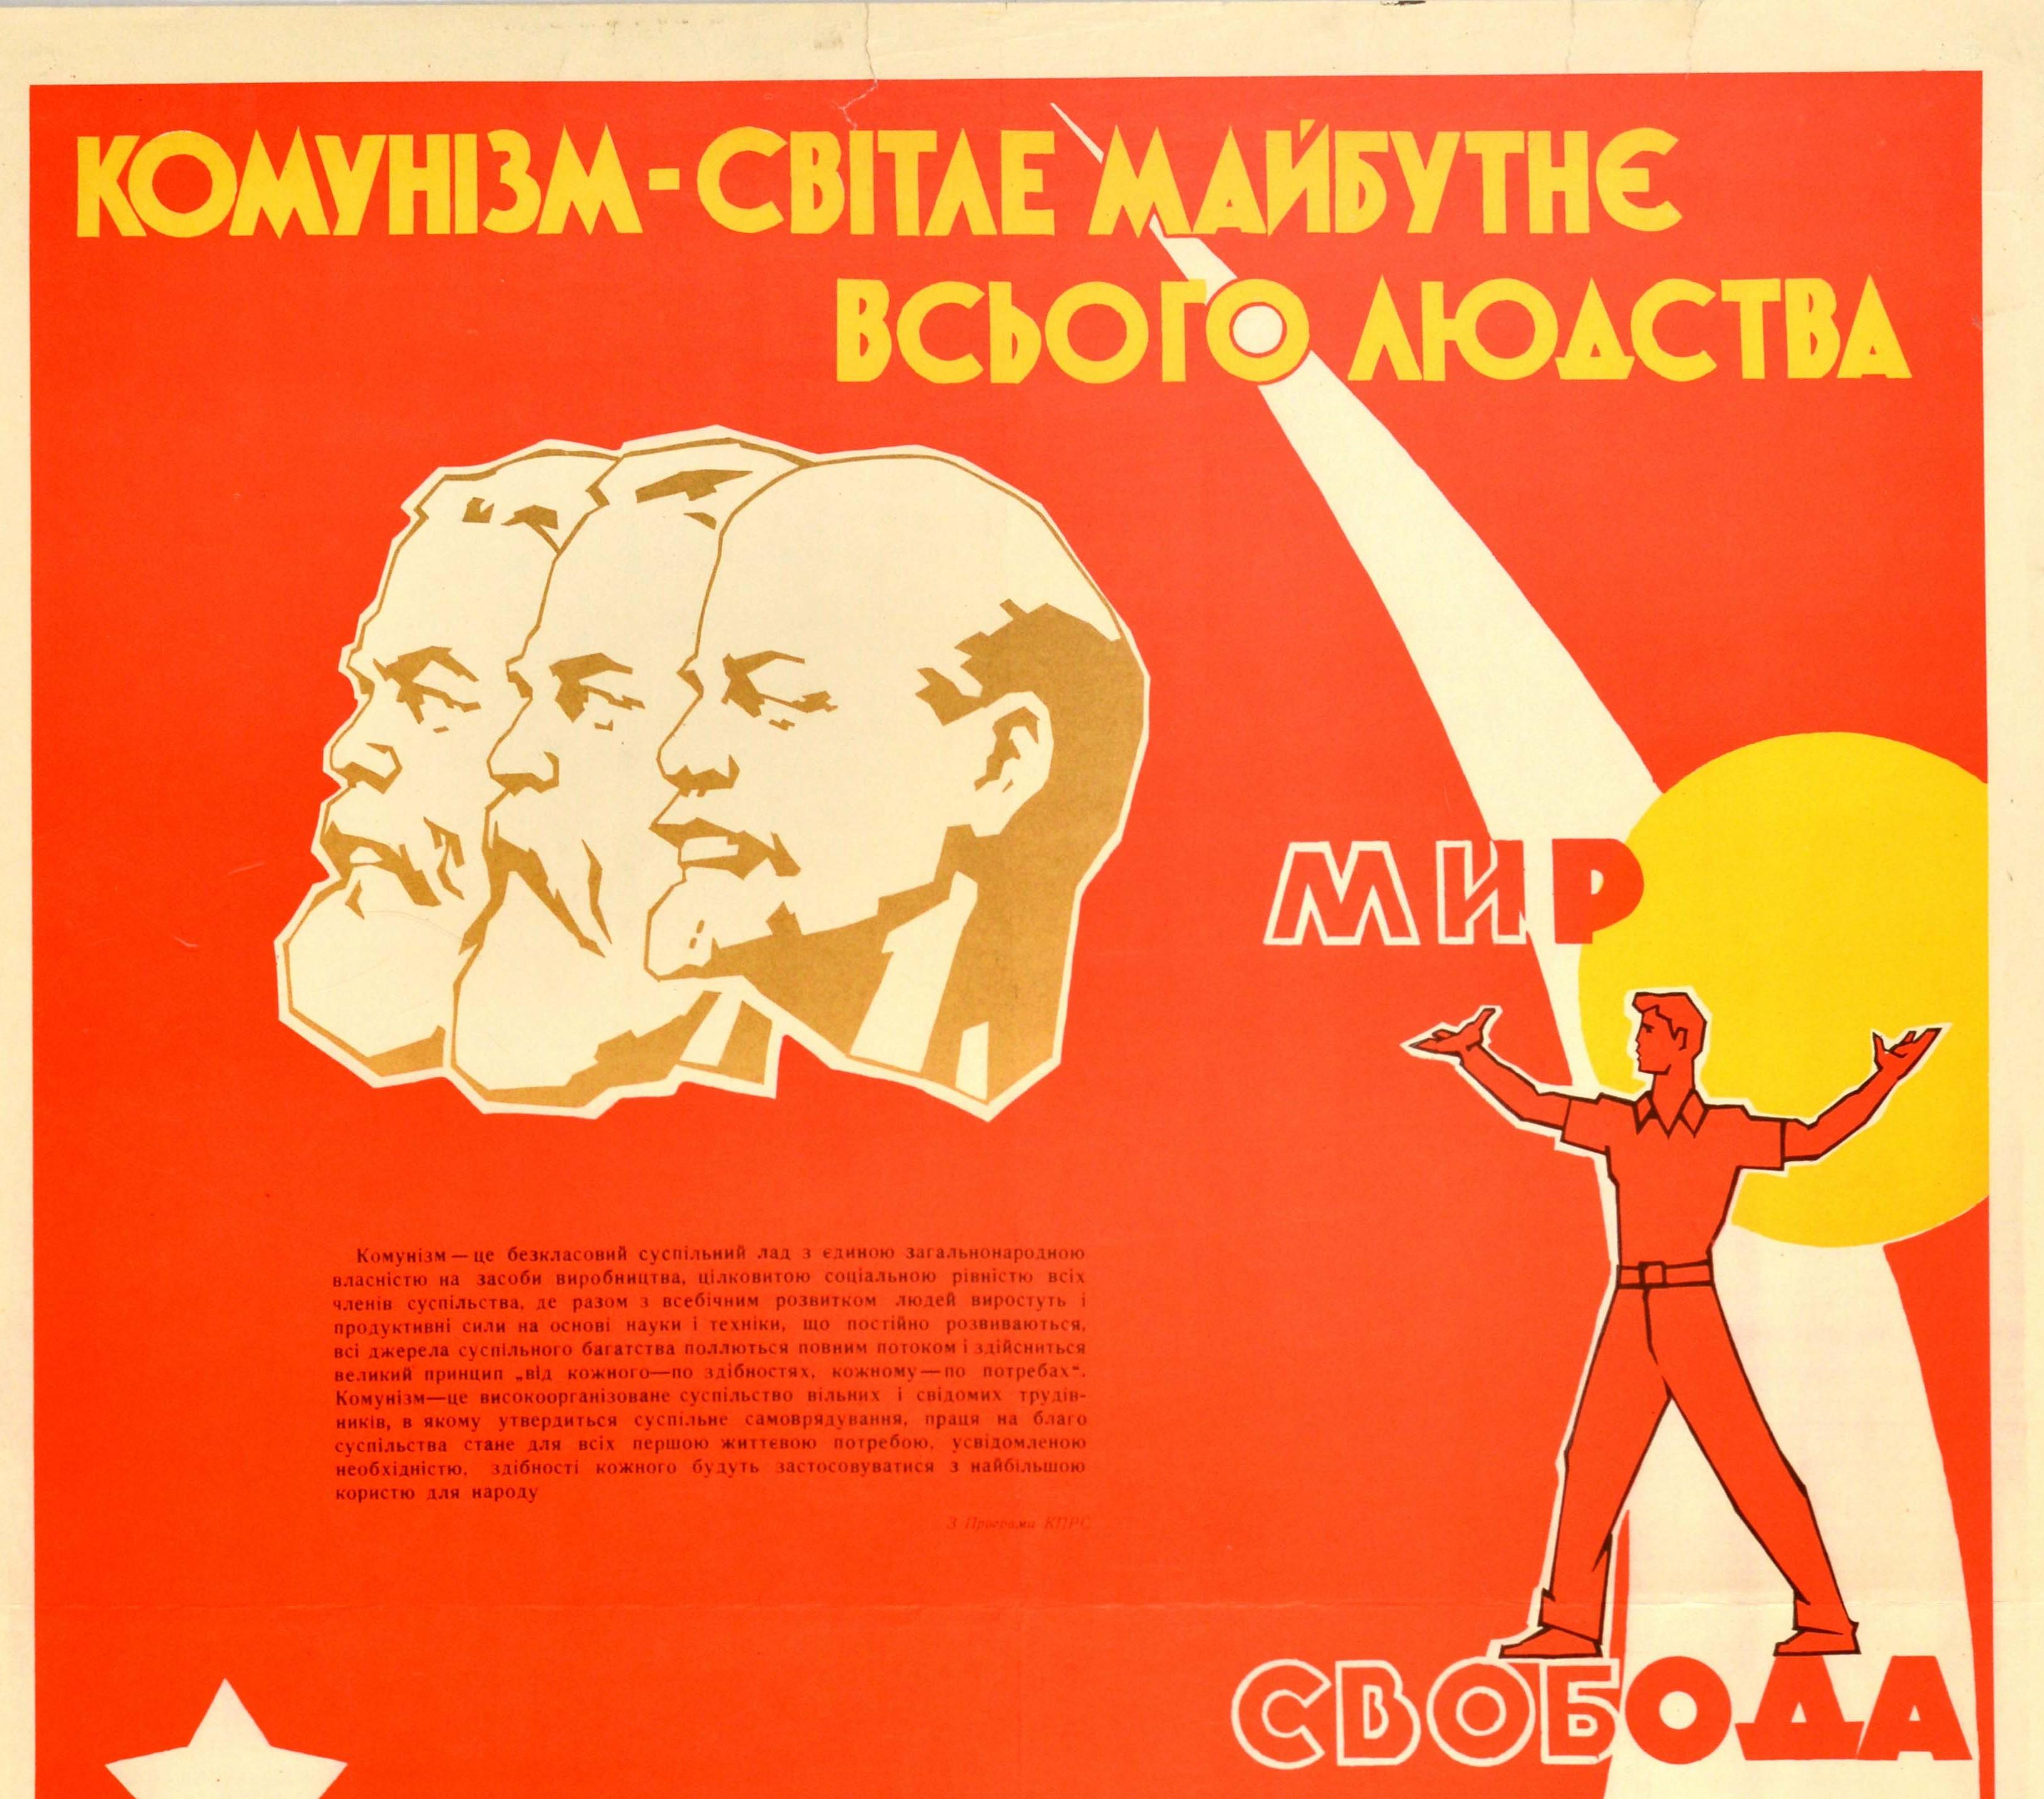 Original vintage Soviet propaganda poster printed in Ukraine - Communism is the Future of All Mankind - featuring Marx, Engels and Lenin below the bold title text in yellow letters with workers, a mother holding up a child and men standing together